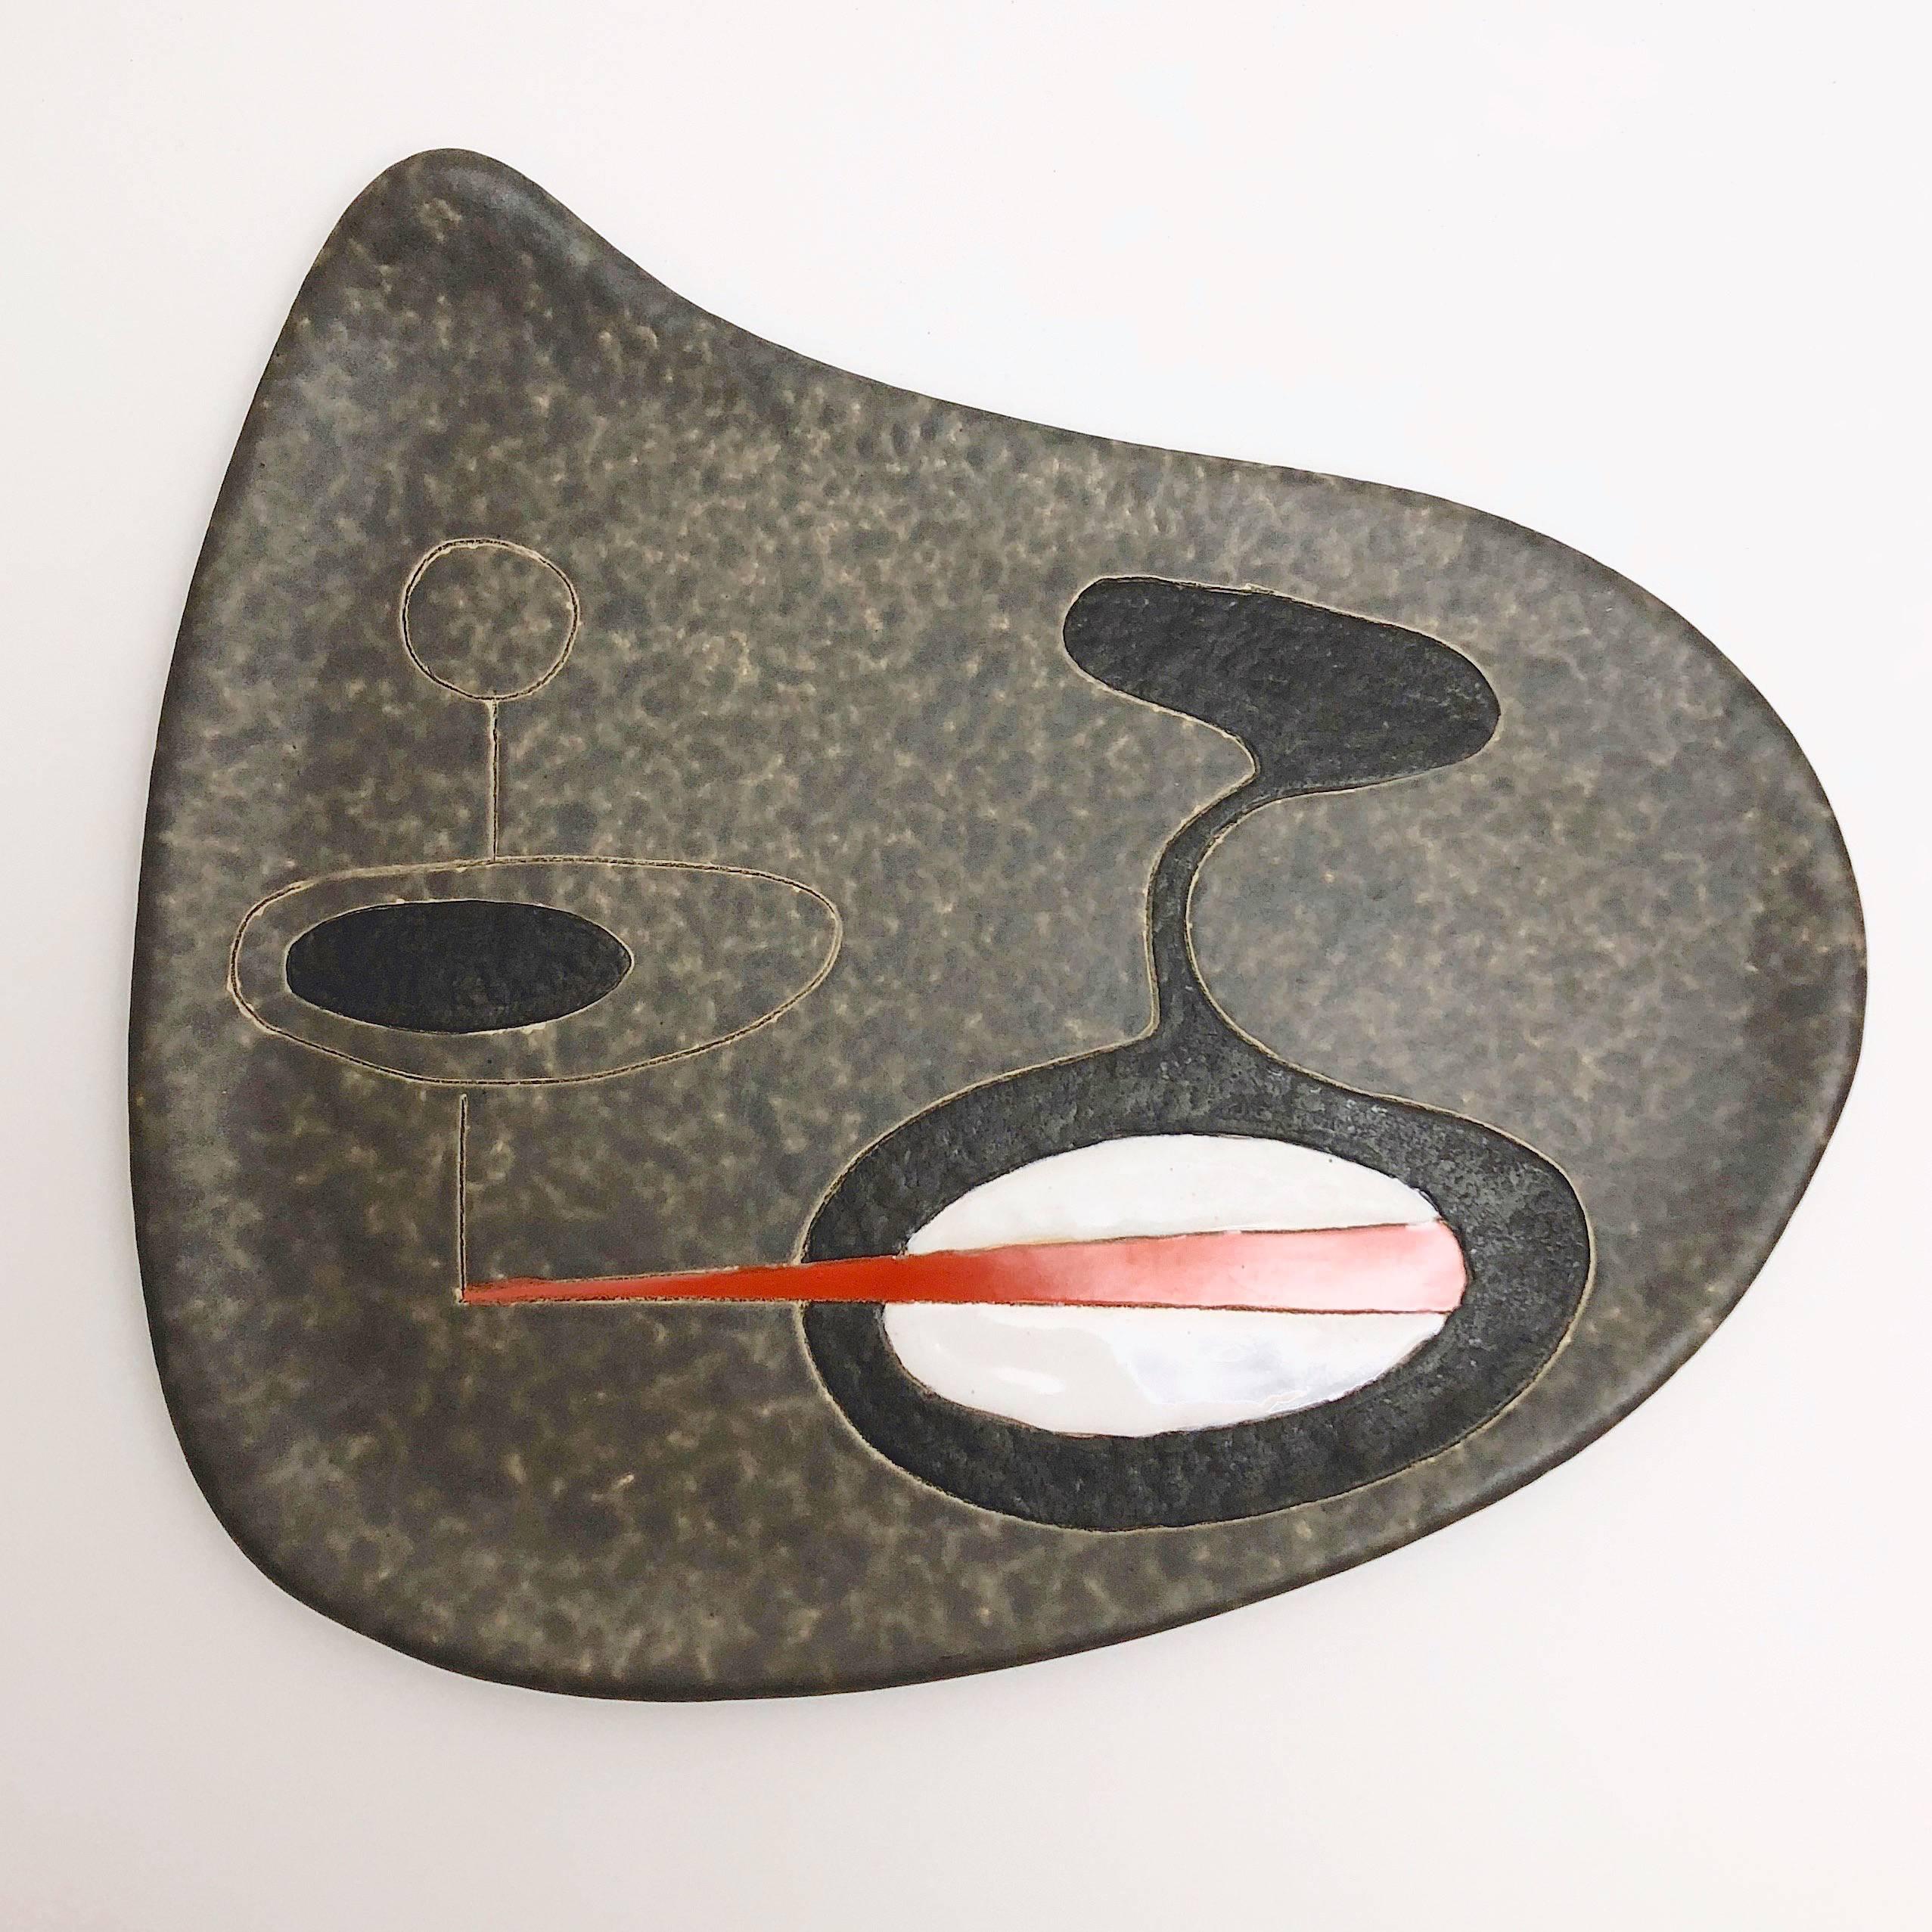 An organic shaped earthenware dish glazed in cloudy warm grey, with abstract and geometric decoration engraved and over-glazed in black, white, and orange. 

Typical Mid-Century Modern abstract and geometric design, reminiscent of Joan Miro´ or